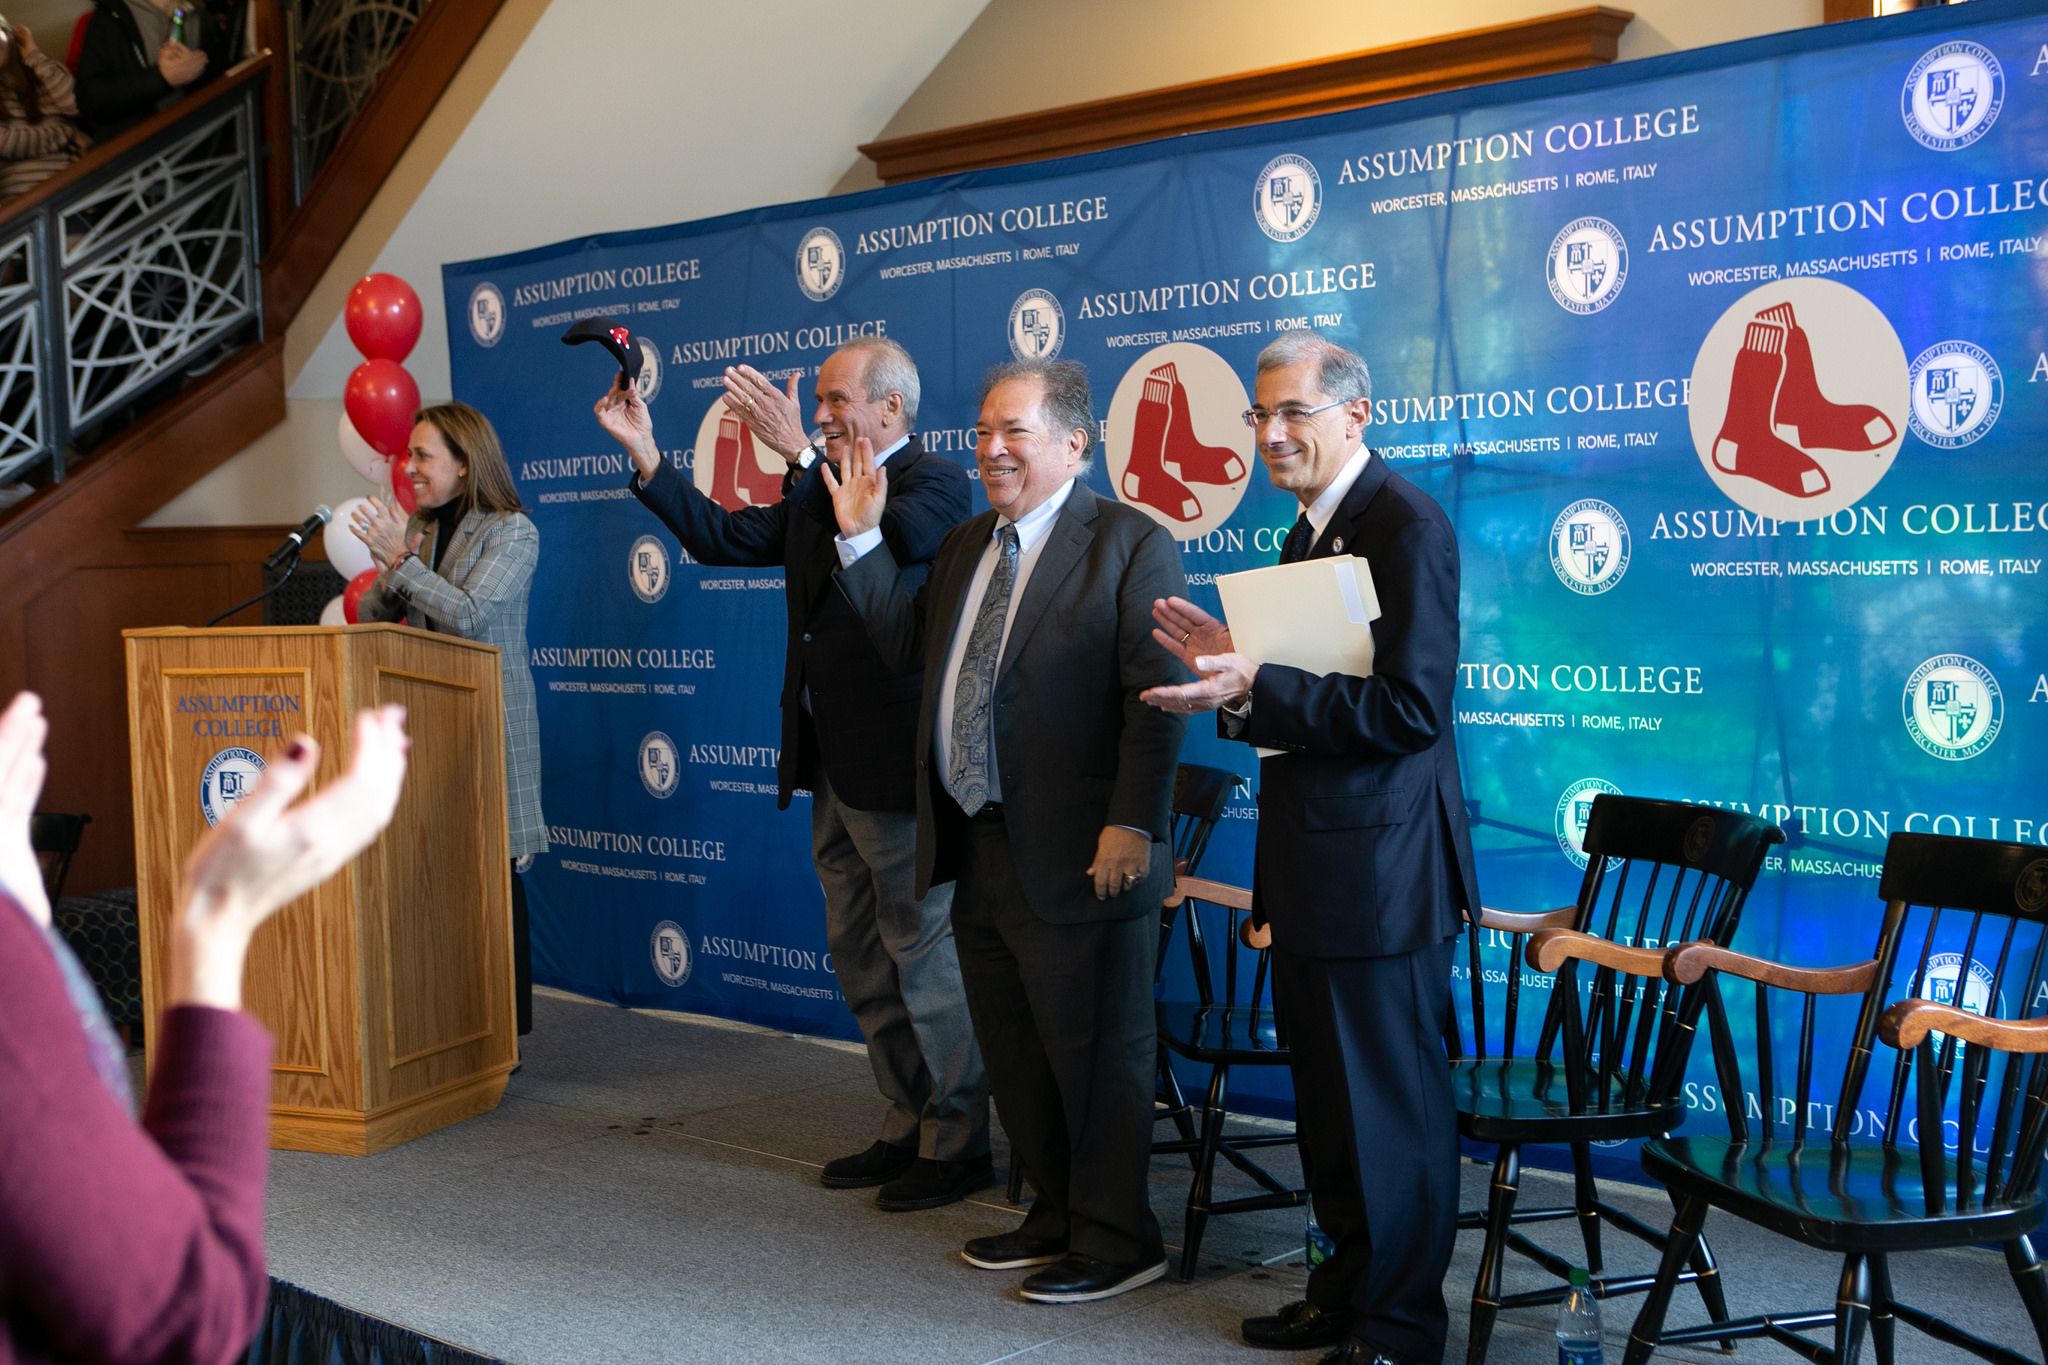 Assumption, Red Sox Partner to Provide Innovative Opportunities for Students, Worcester